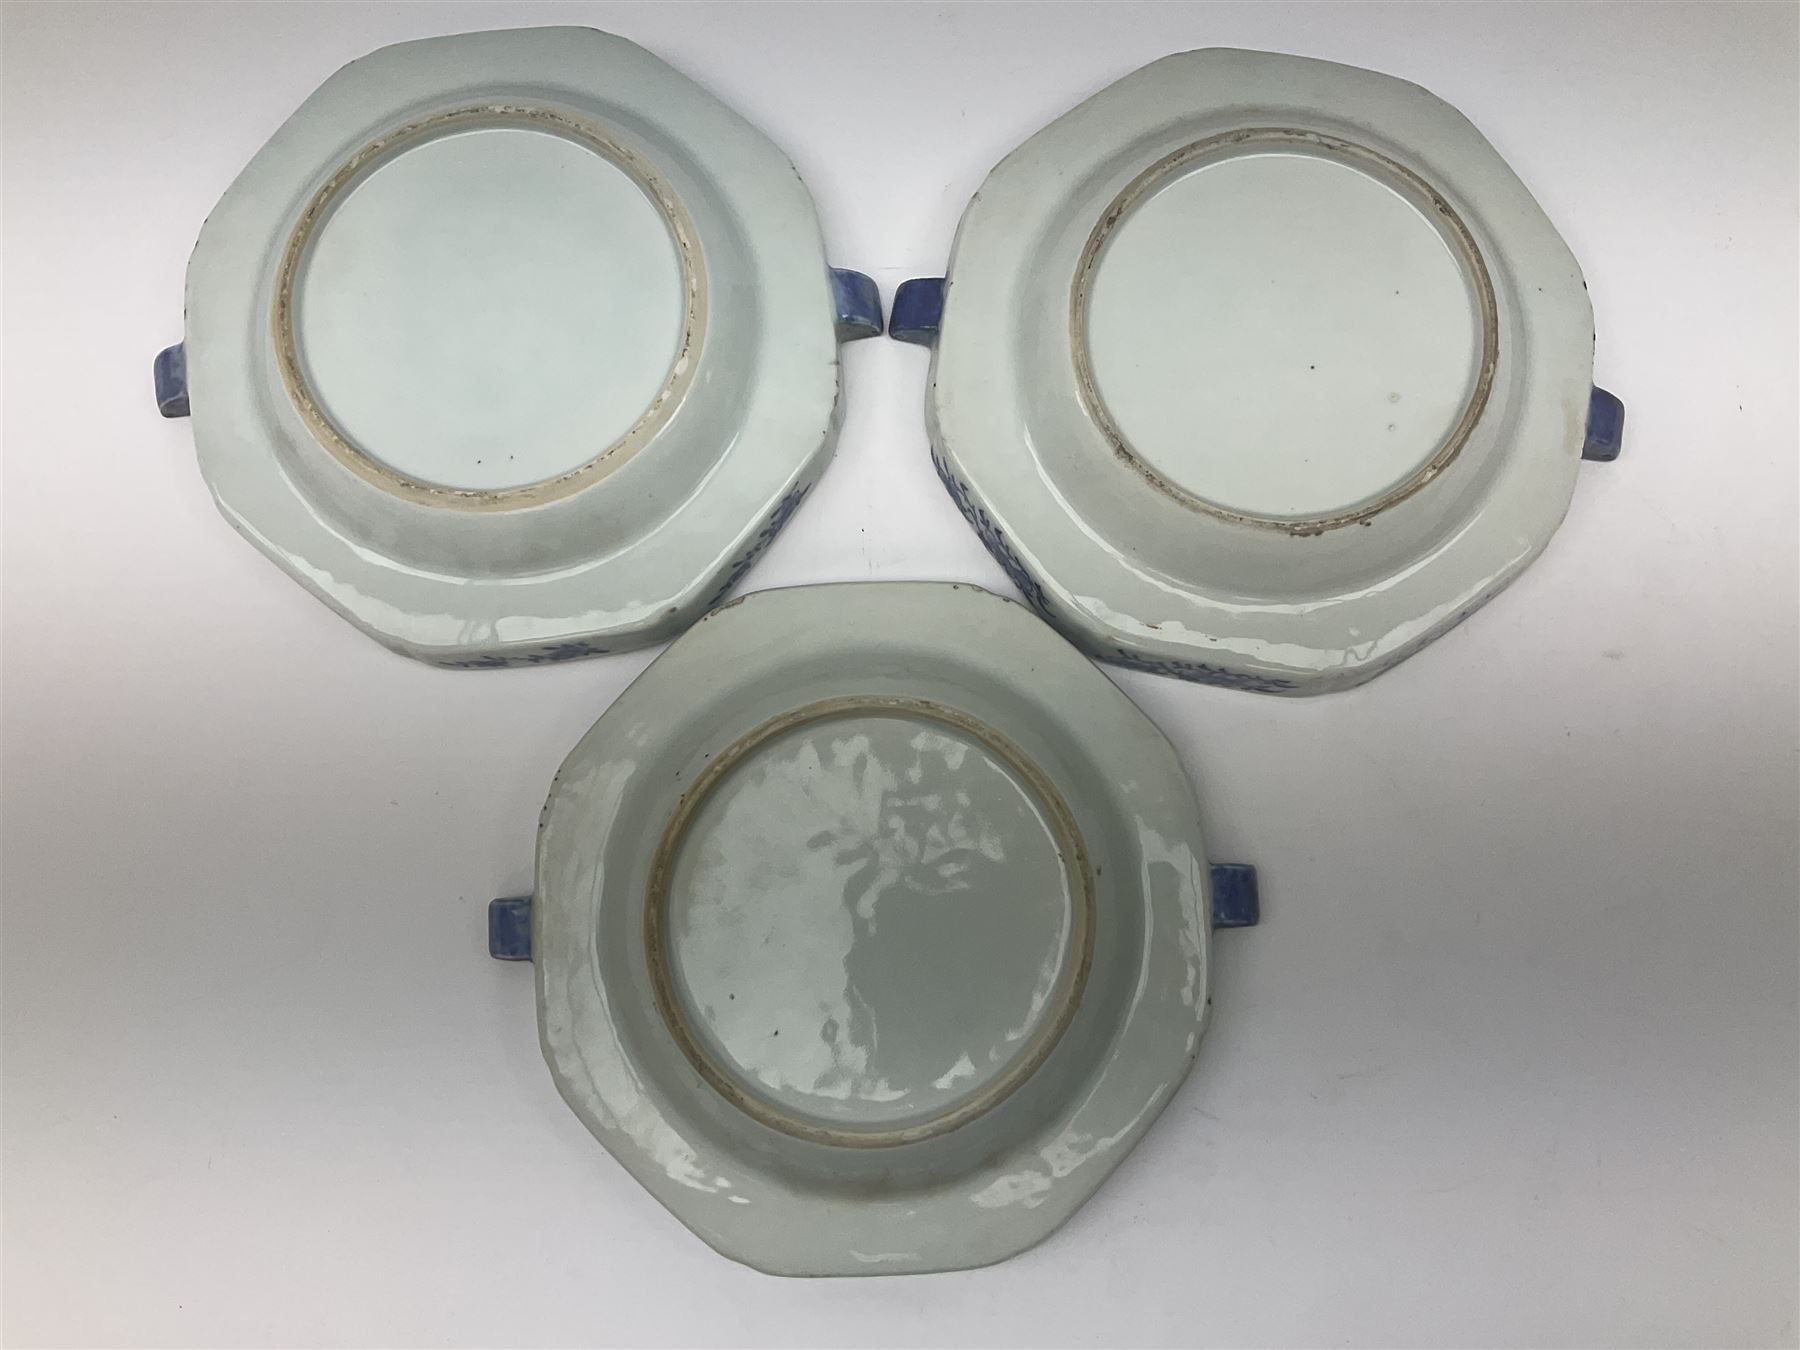 Three late 18th/early 19th century Chinese export hot water plates - Image 11 of 13